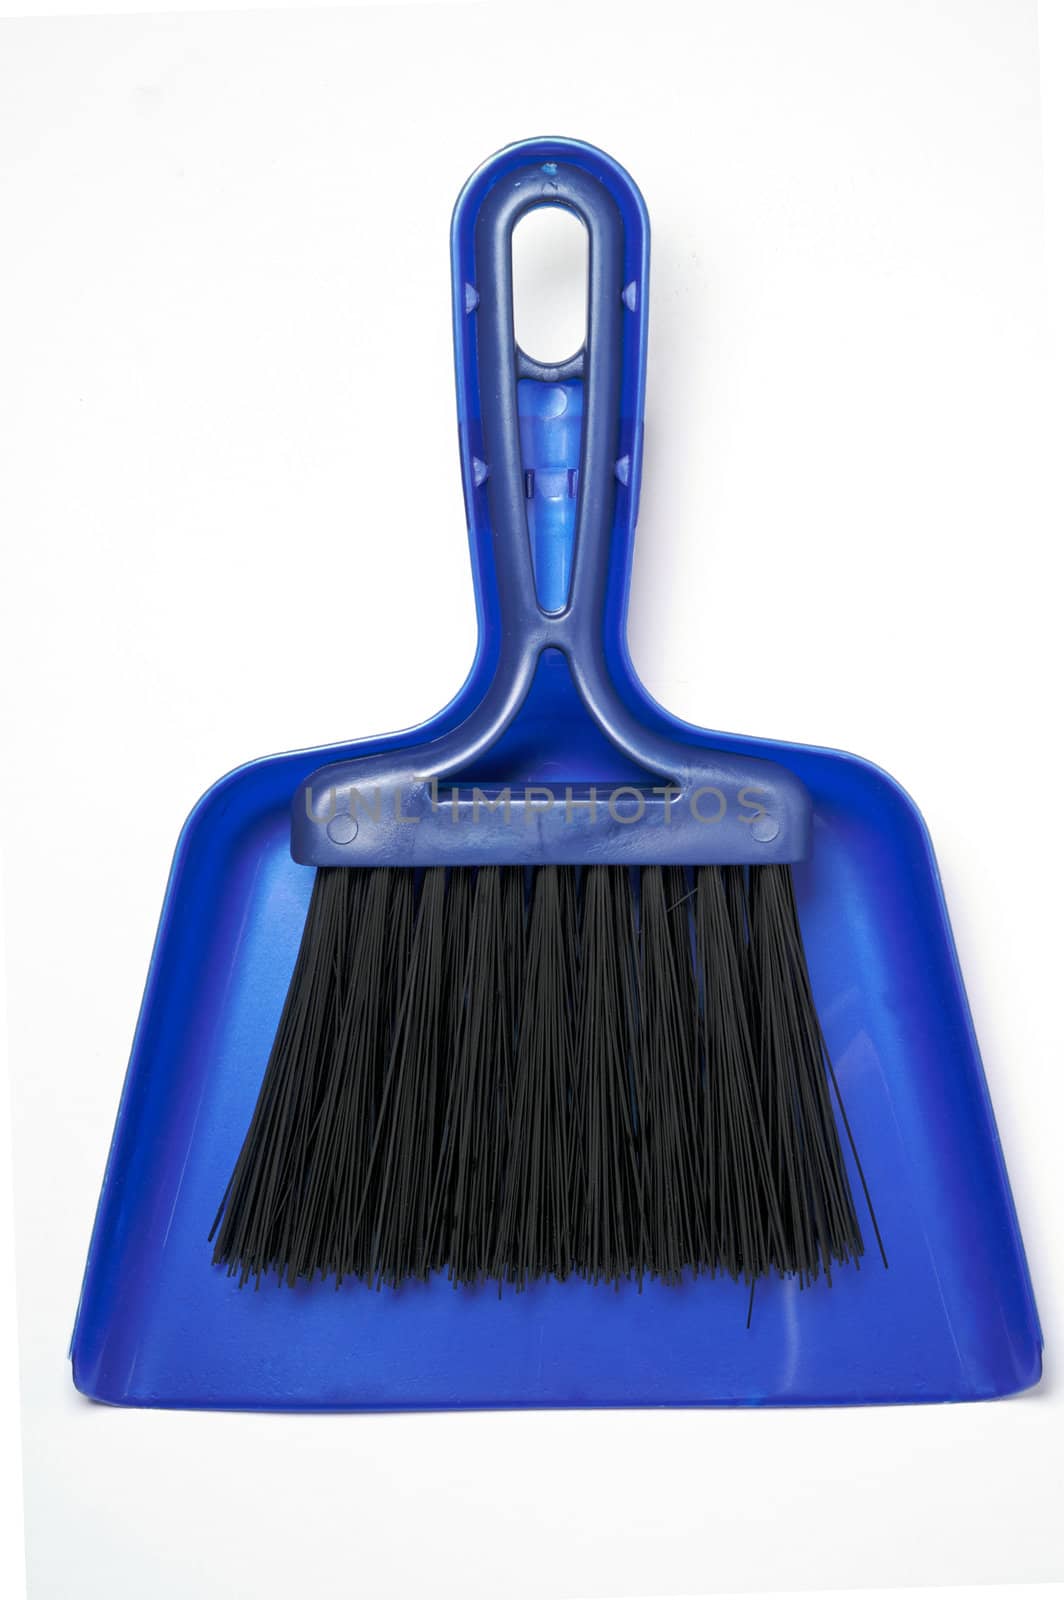 Dustpan and brush with clipping path